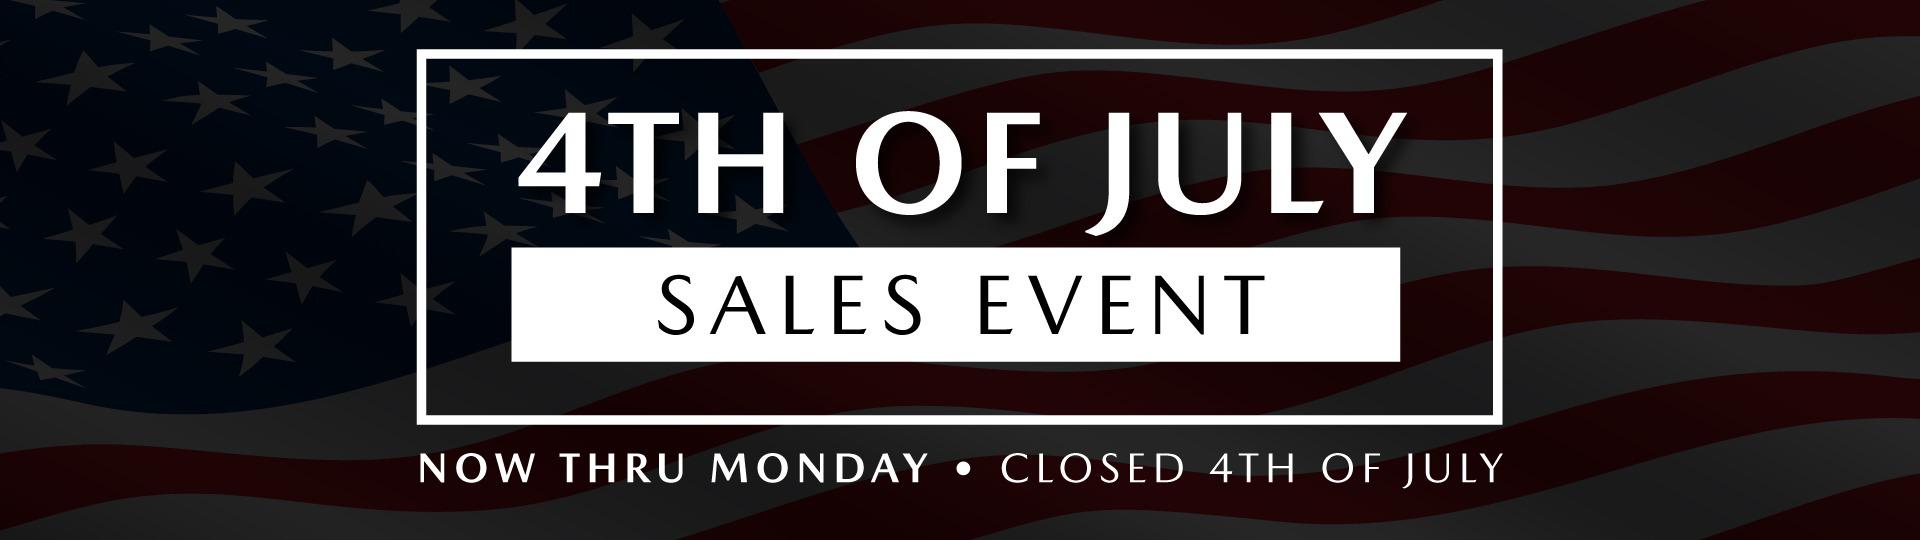 Now Thru Monday (Closed 4th of July)